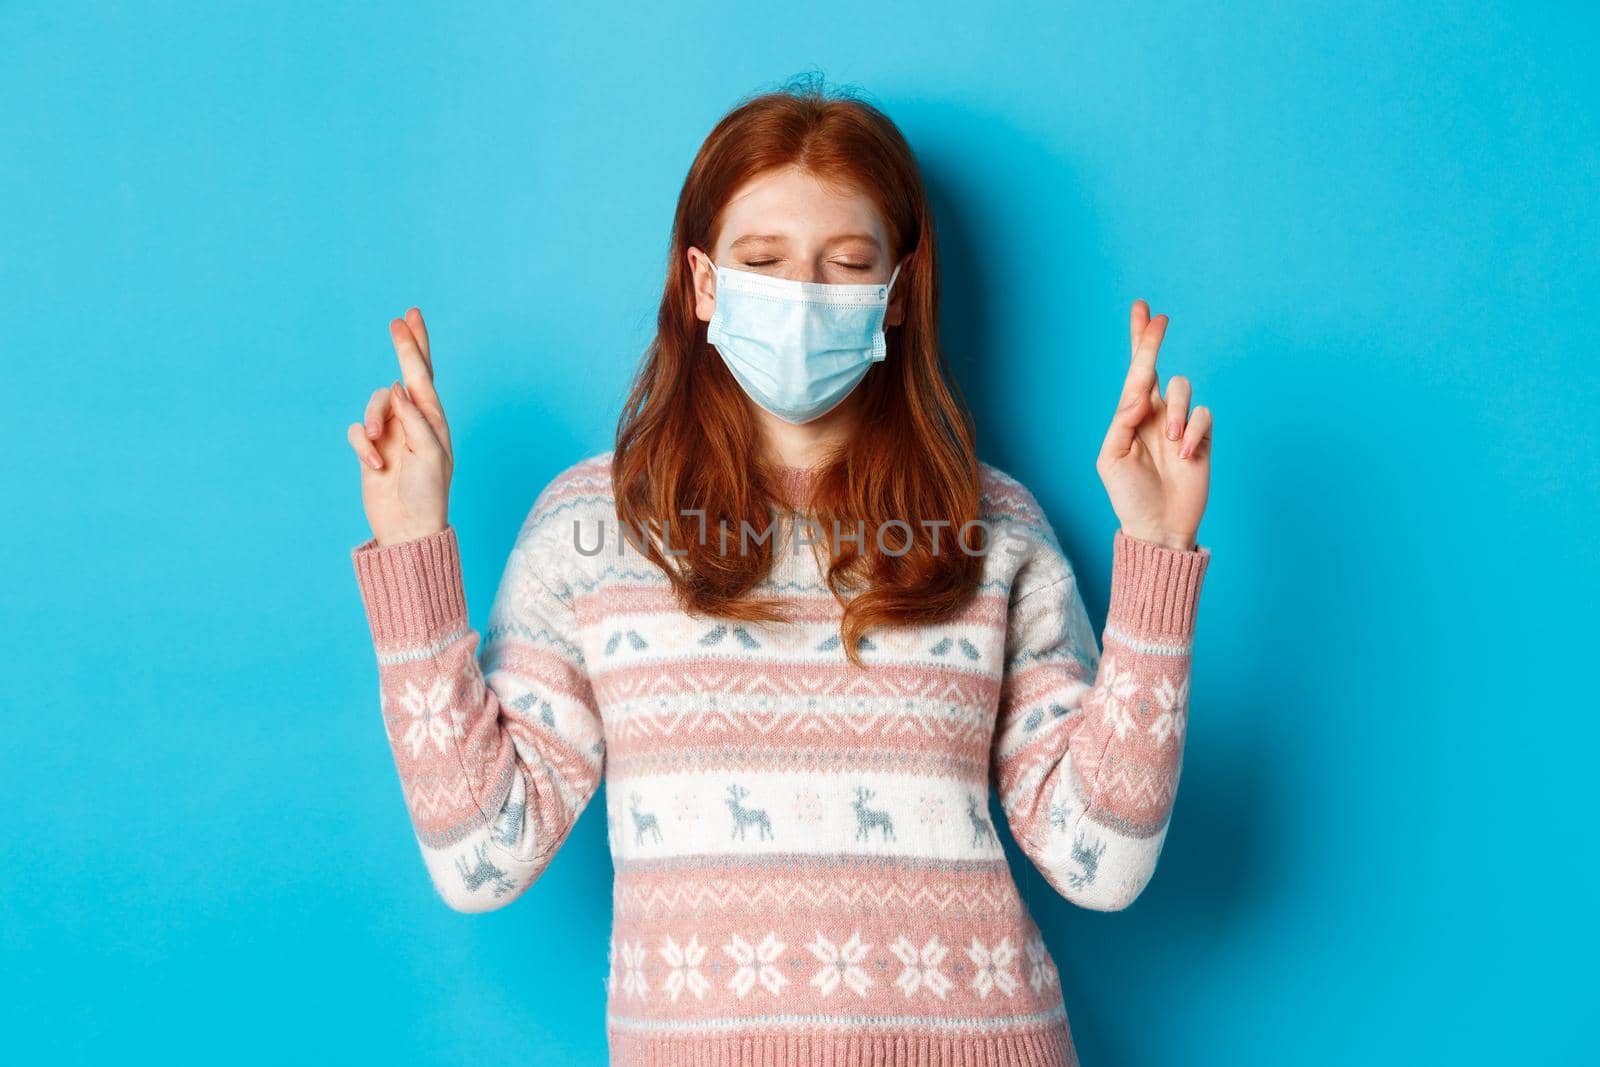 Winter, coronavirus and social distancing concept. Cute hopeful girl with red hair, wearing face mask, cross fingers and making wish, standing over blue background.